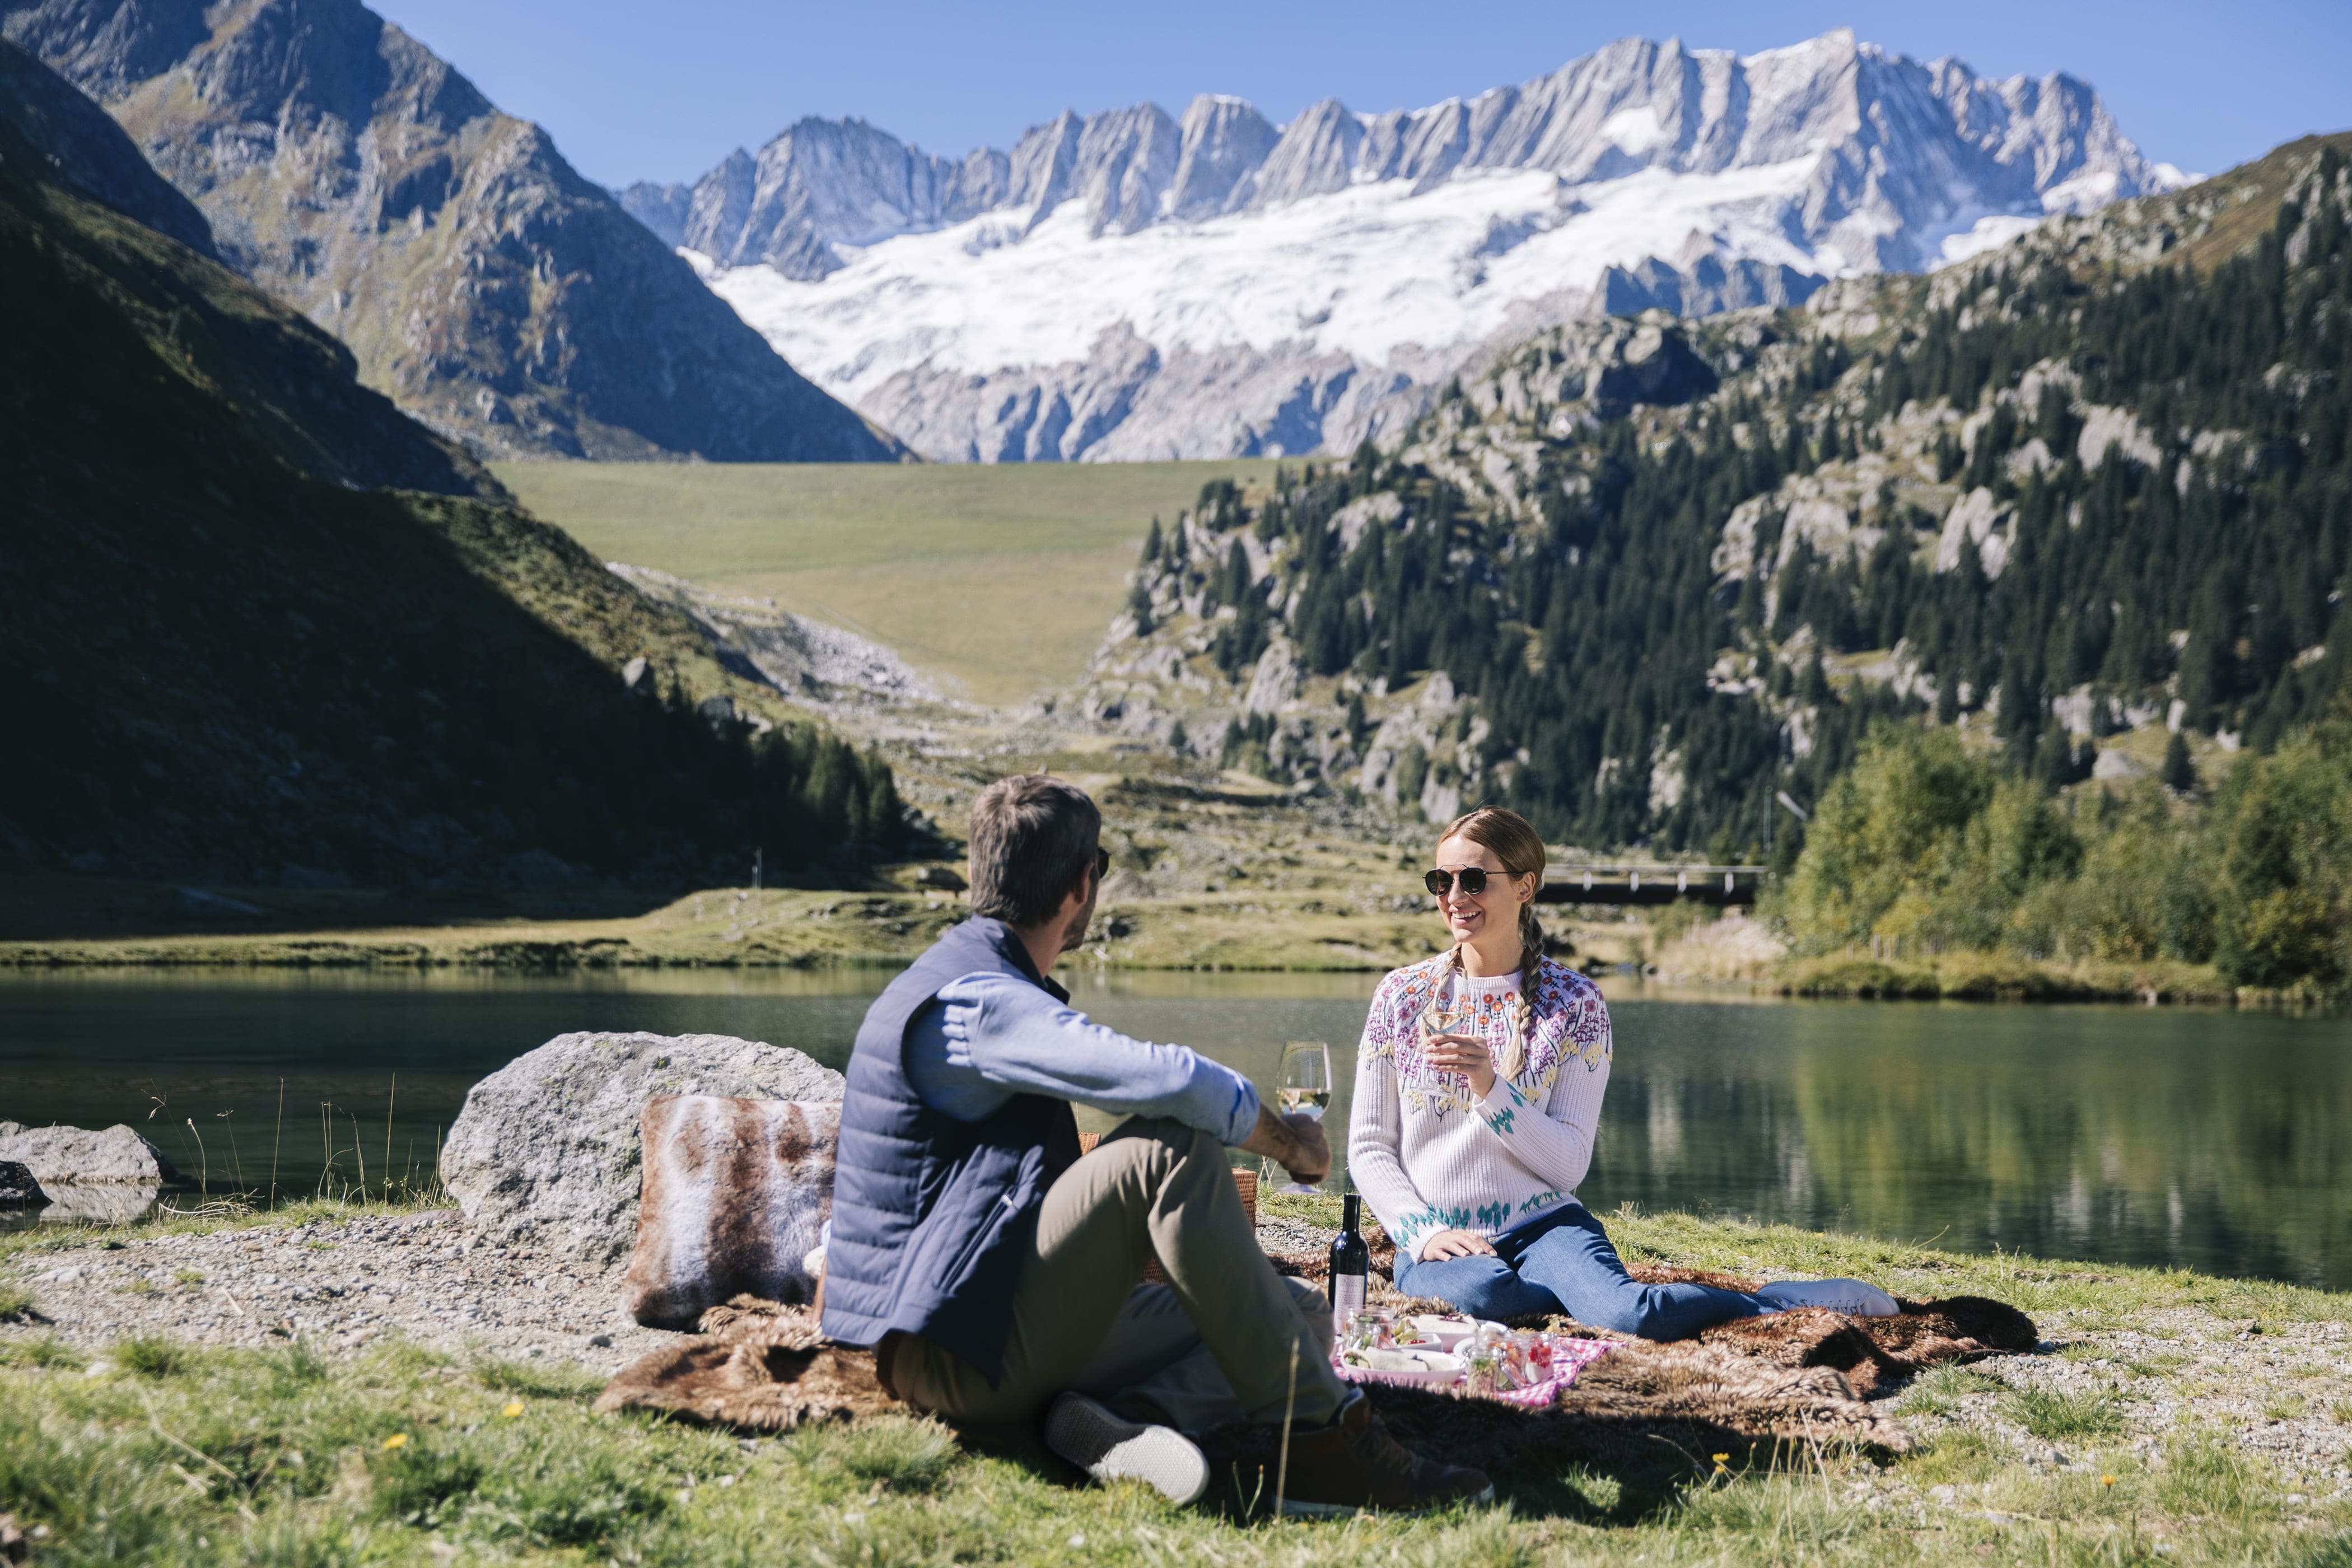 A Man And Woman Sitting On A Rock By A Lake With Mountains In The Background